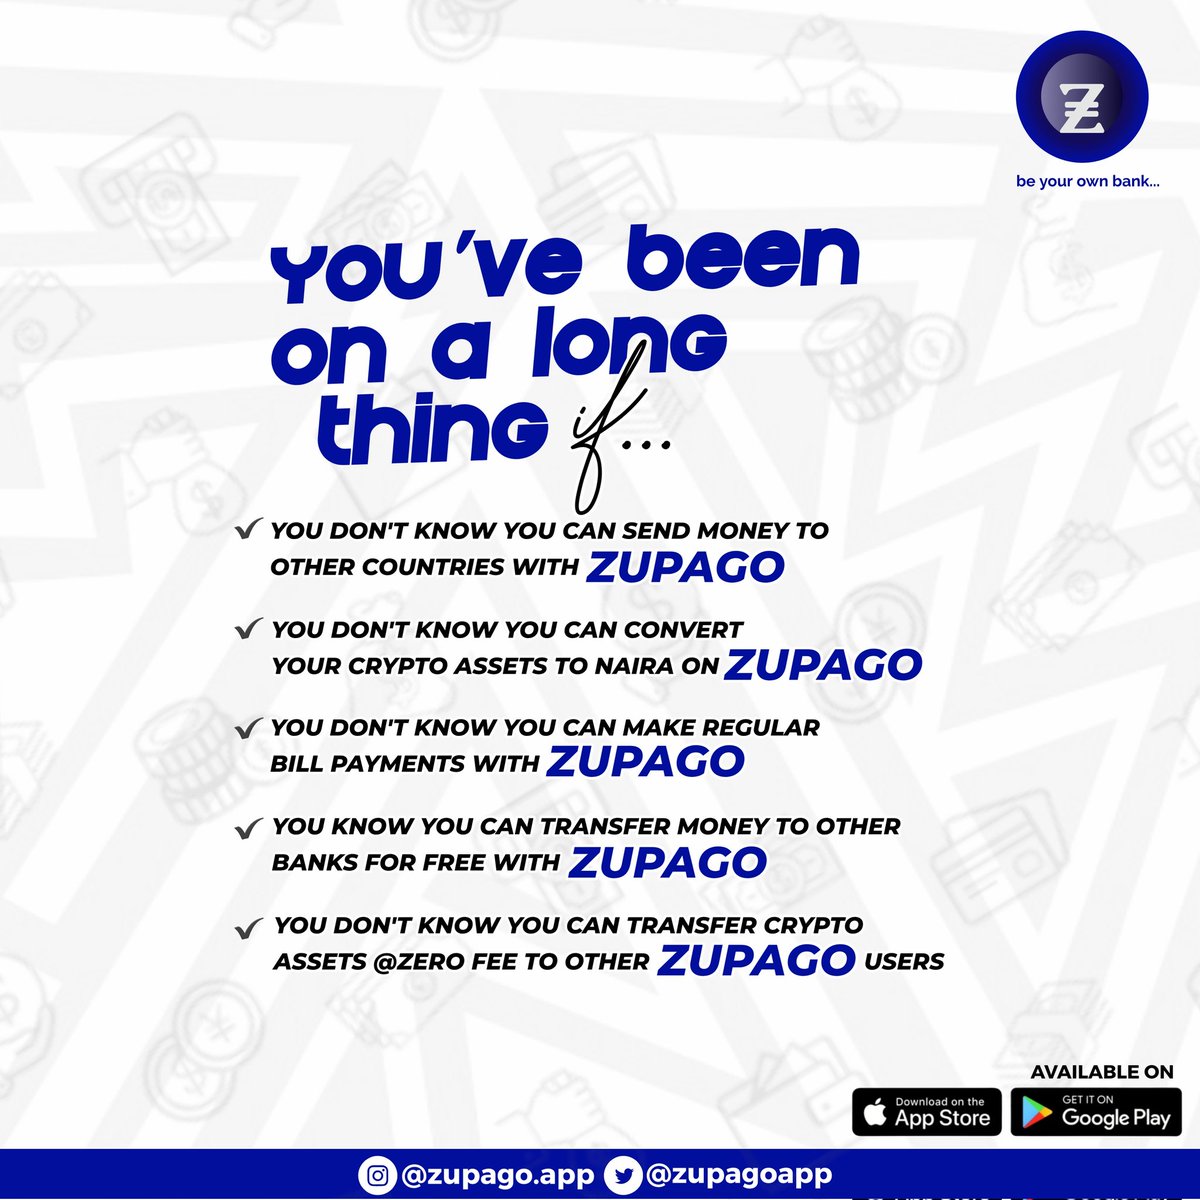 What are you waiting for?
Make that switch!
Join the ZuPago family today!
Be your own bank!

#Zupagoapp #fintech #Internetbanking #cryptocurrency #Bitcoin    #tuesdayvibe #Banking #Transfers
 @Ekitipikin @zupagoapp